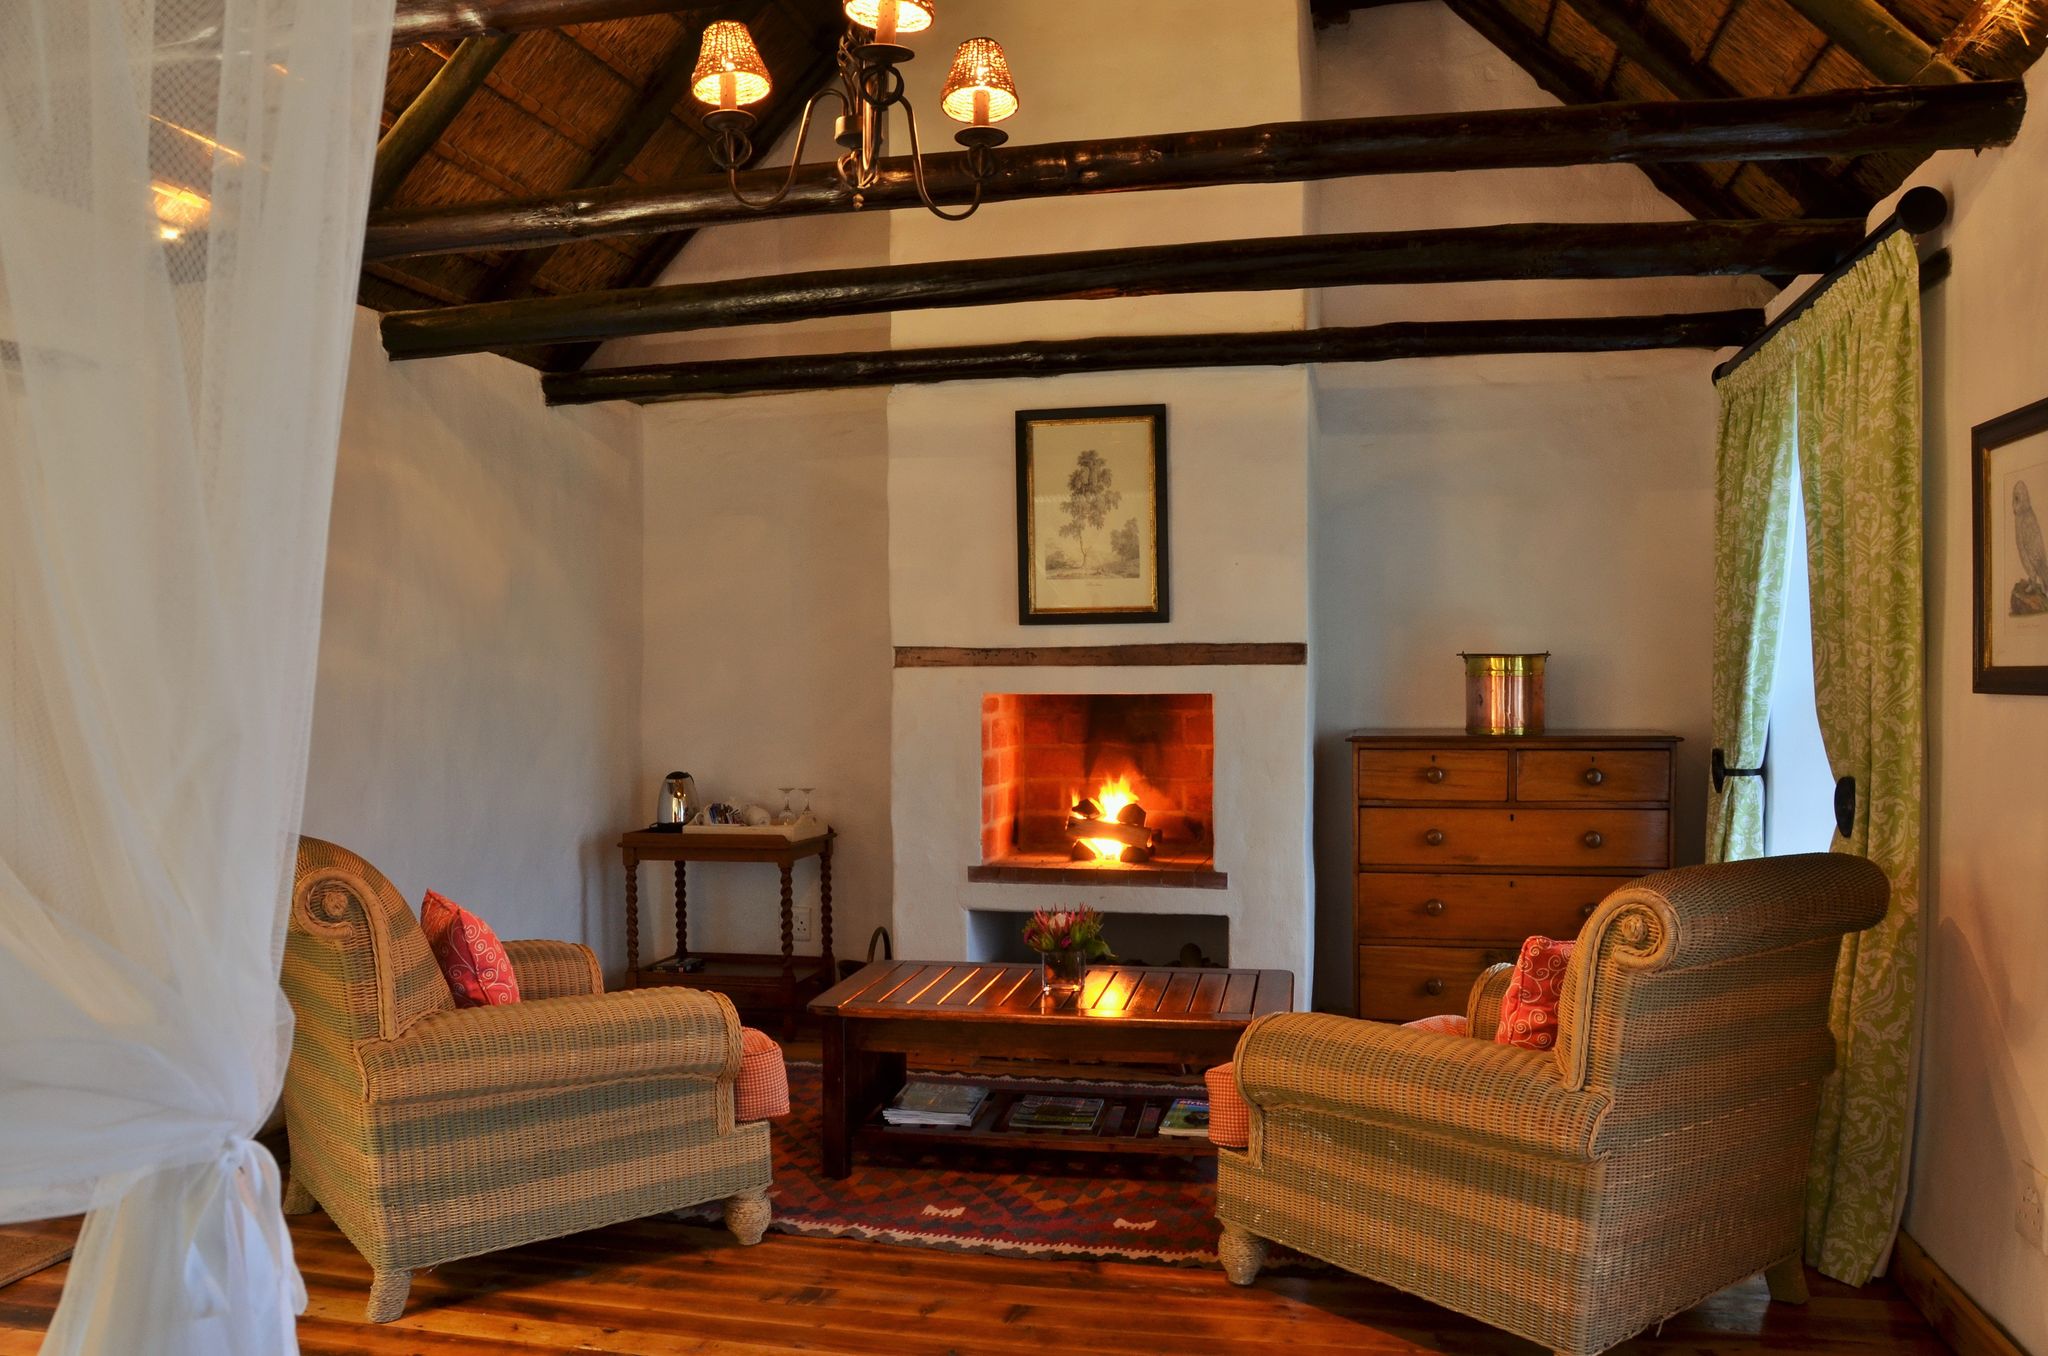 De Hoop Collection Accommodation